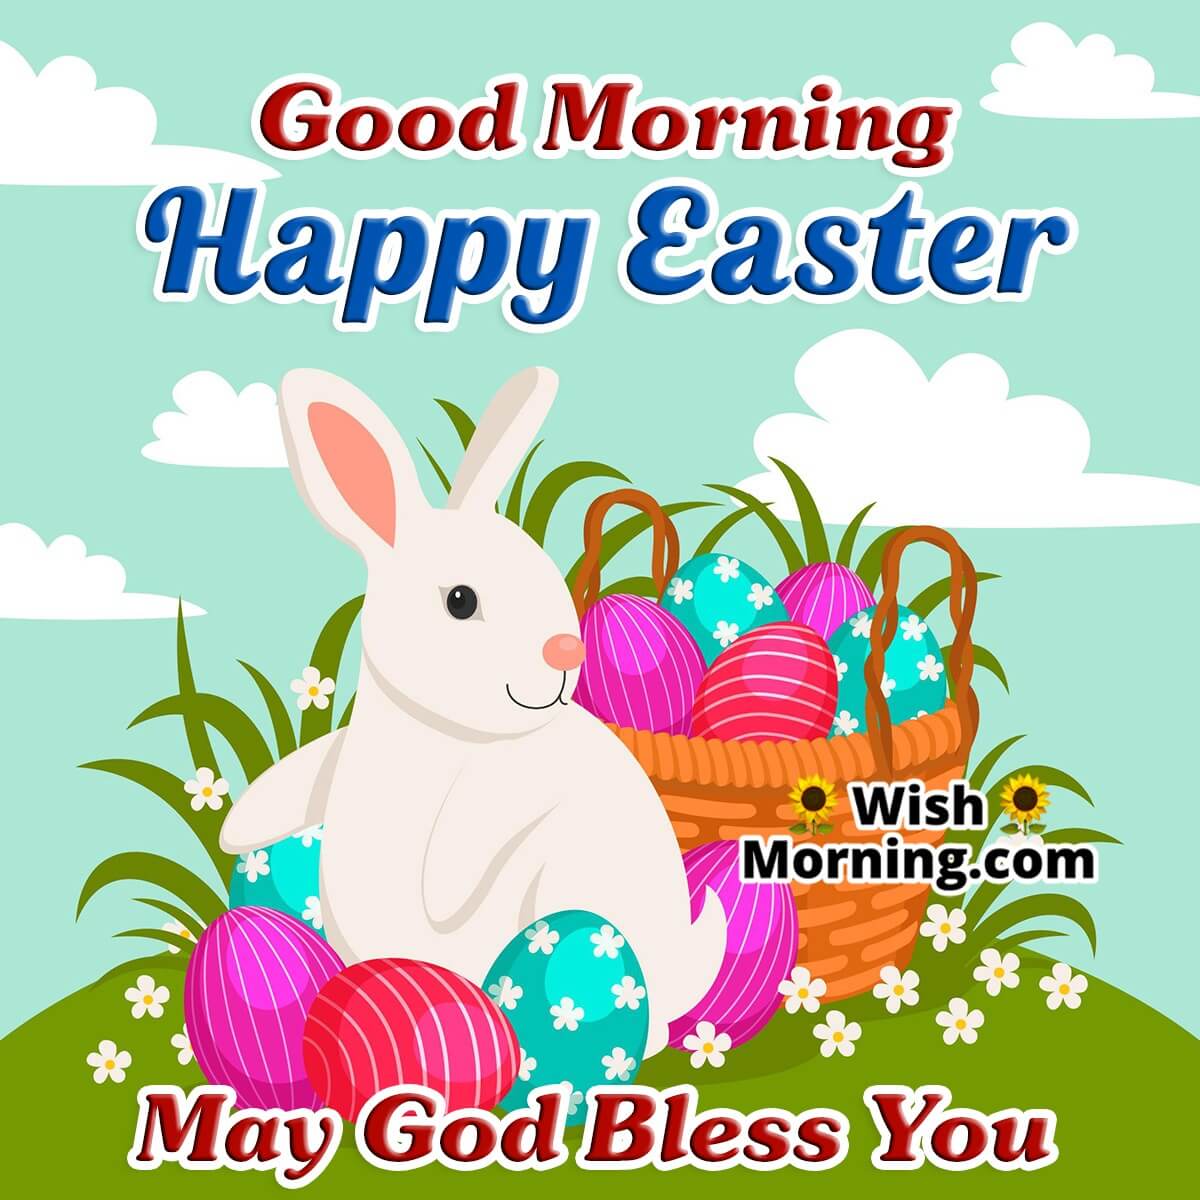 Good Morning Happy Easter God Bless You